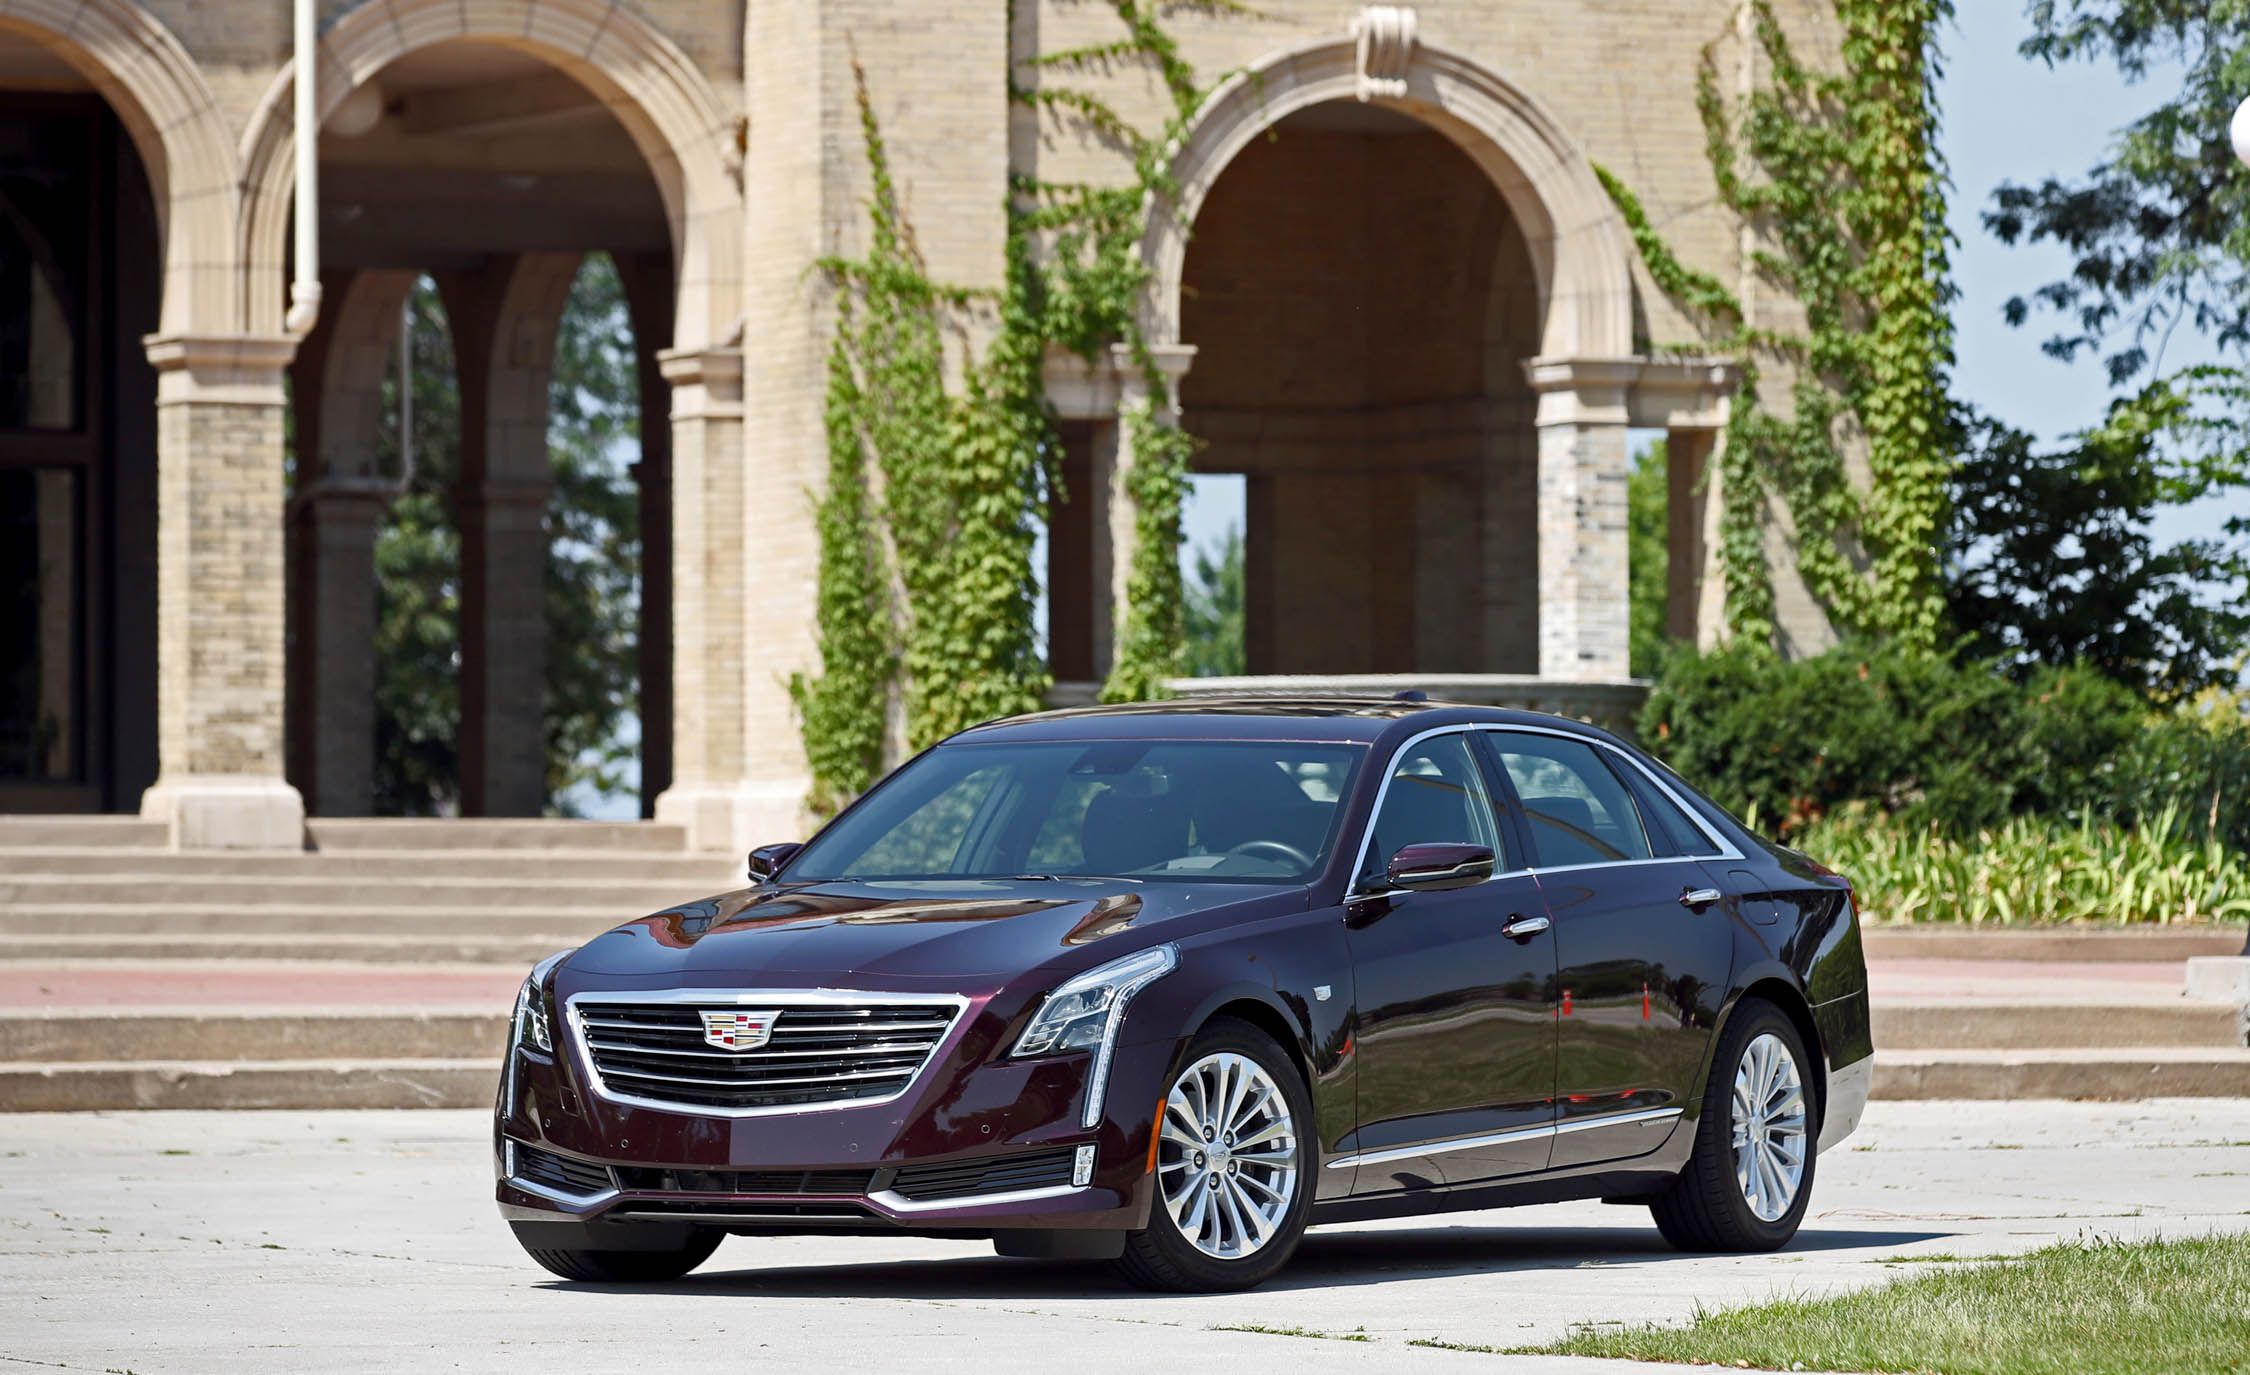 Cadillac CT6 Plug-In Hybrid Discontinued – Dropped from the Lineup for 2019